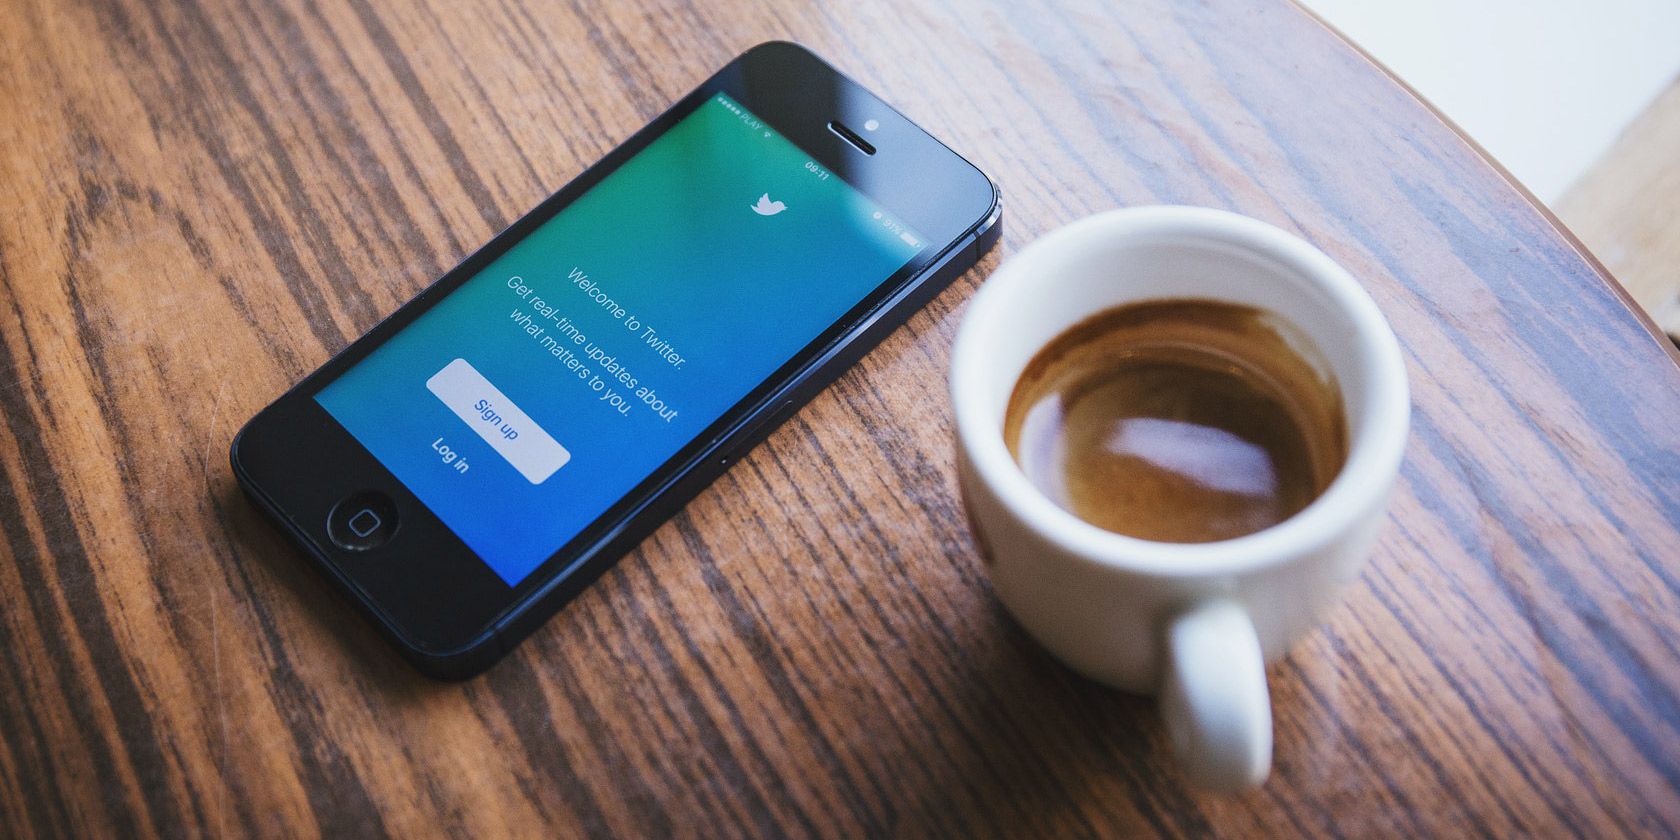 Twitter open on a mobile phone next to a coffee mug